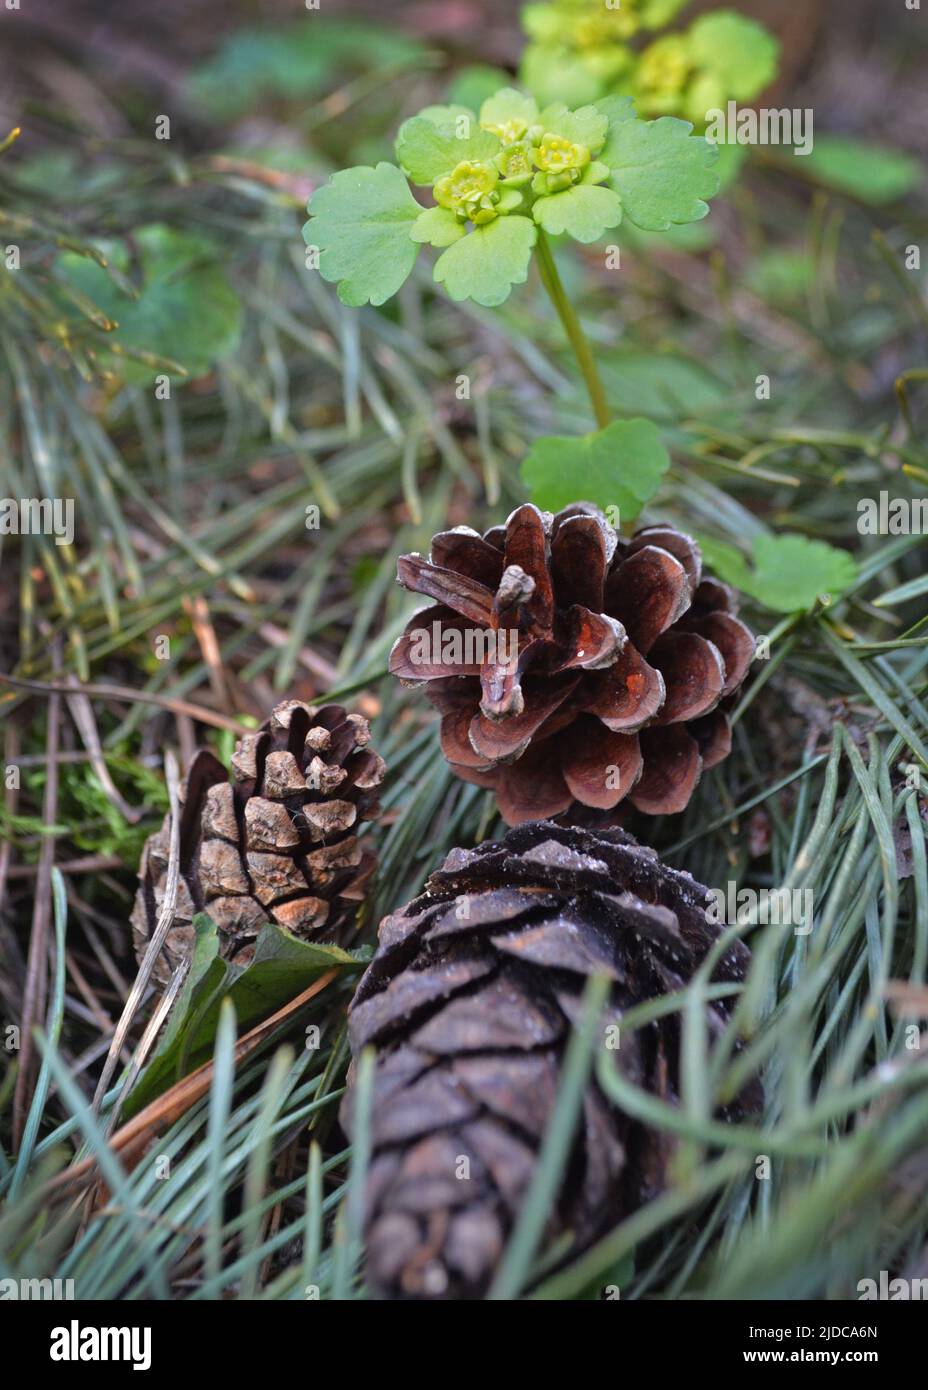 pine cone in a Pine Tree. Pinus. Isolated pine. Pine branch with cones isolated on light natural background Stock Photo